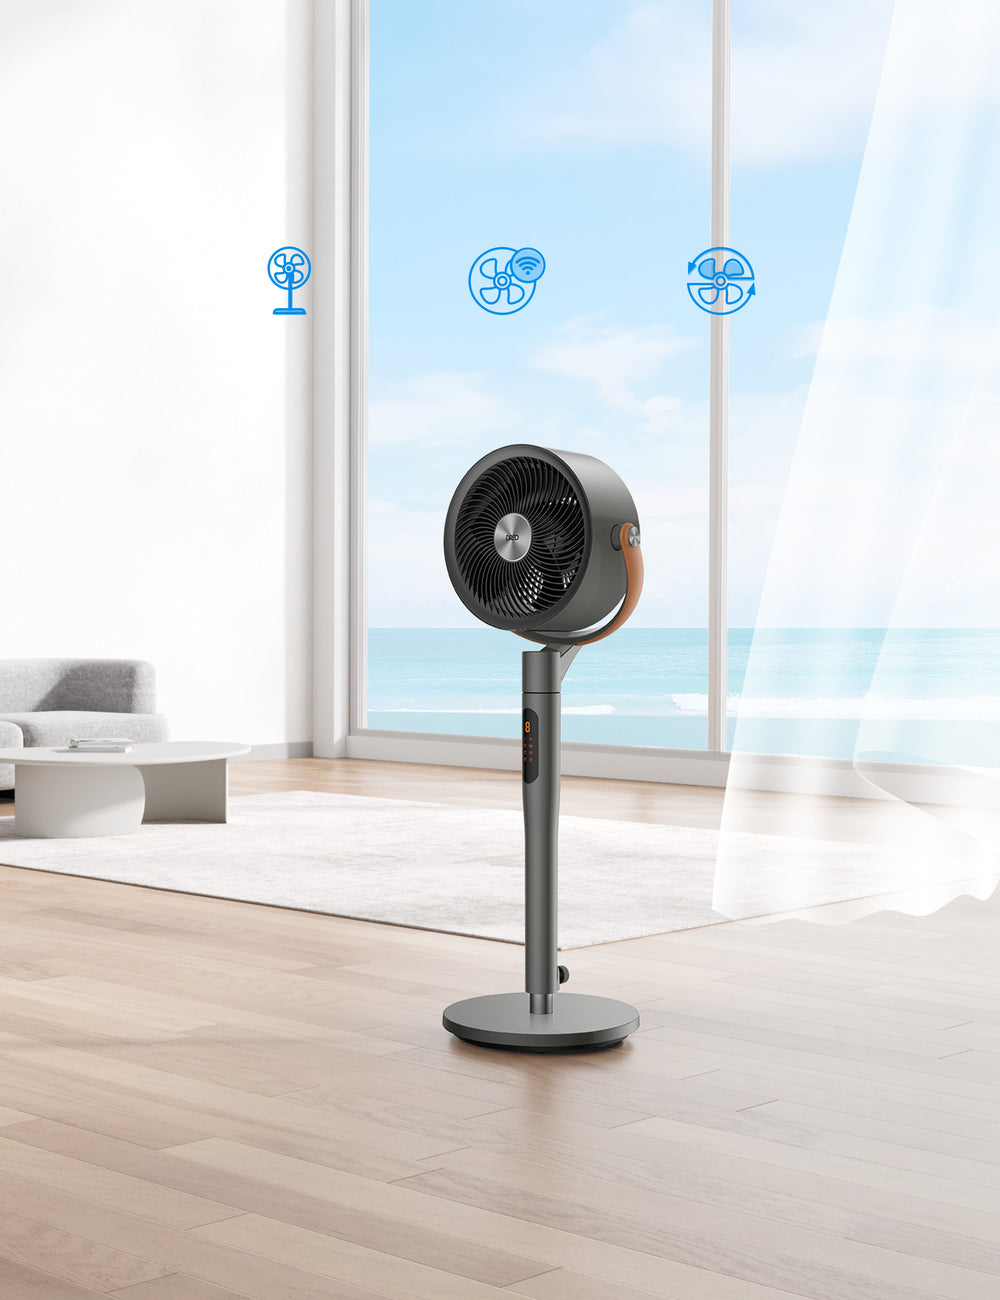 Dreo - Pedestal Fan with Remote, 120° + 105°Smart Oscillating Floor Fans with Wi-Fi/Voice Control, Works with Alexa/Google - Gray_1